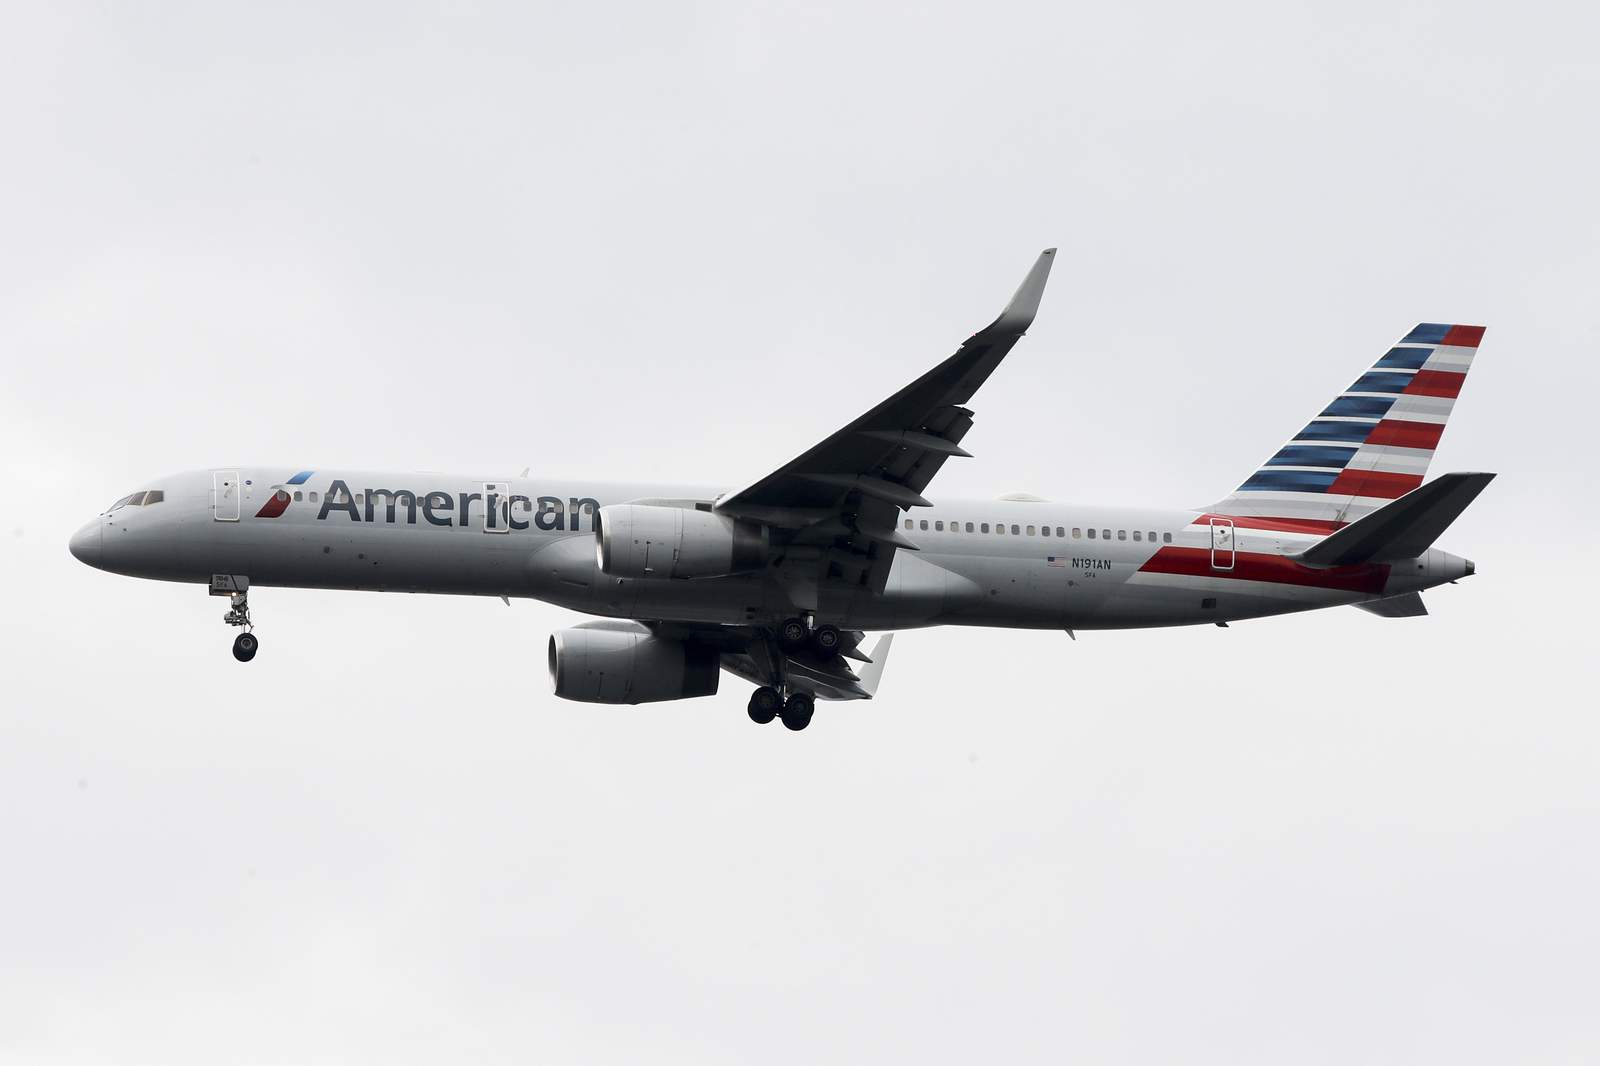 American Airlines pilot reportedly tests positive for COVID-19